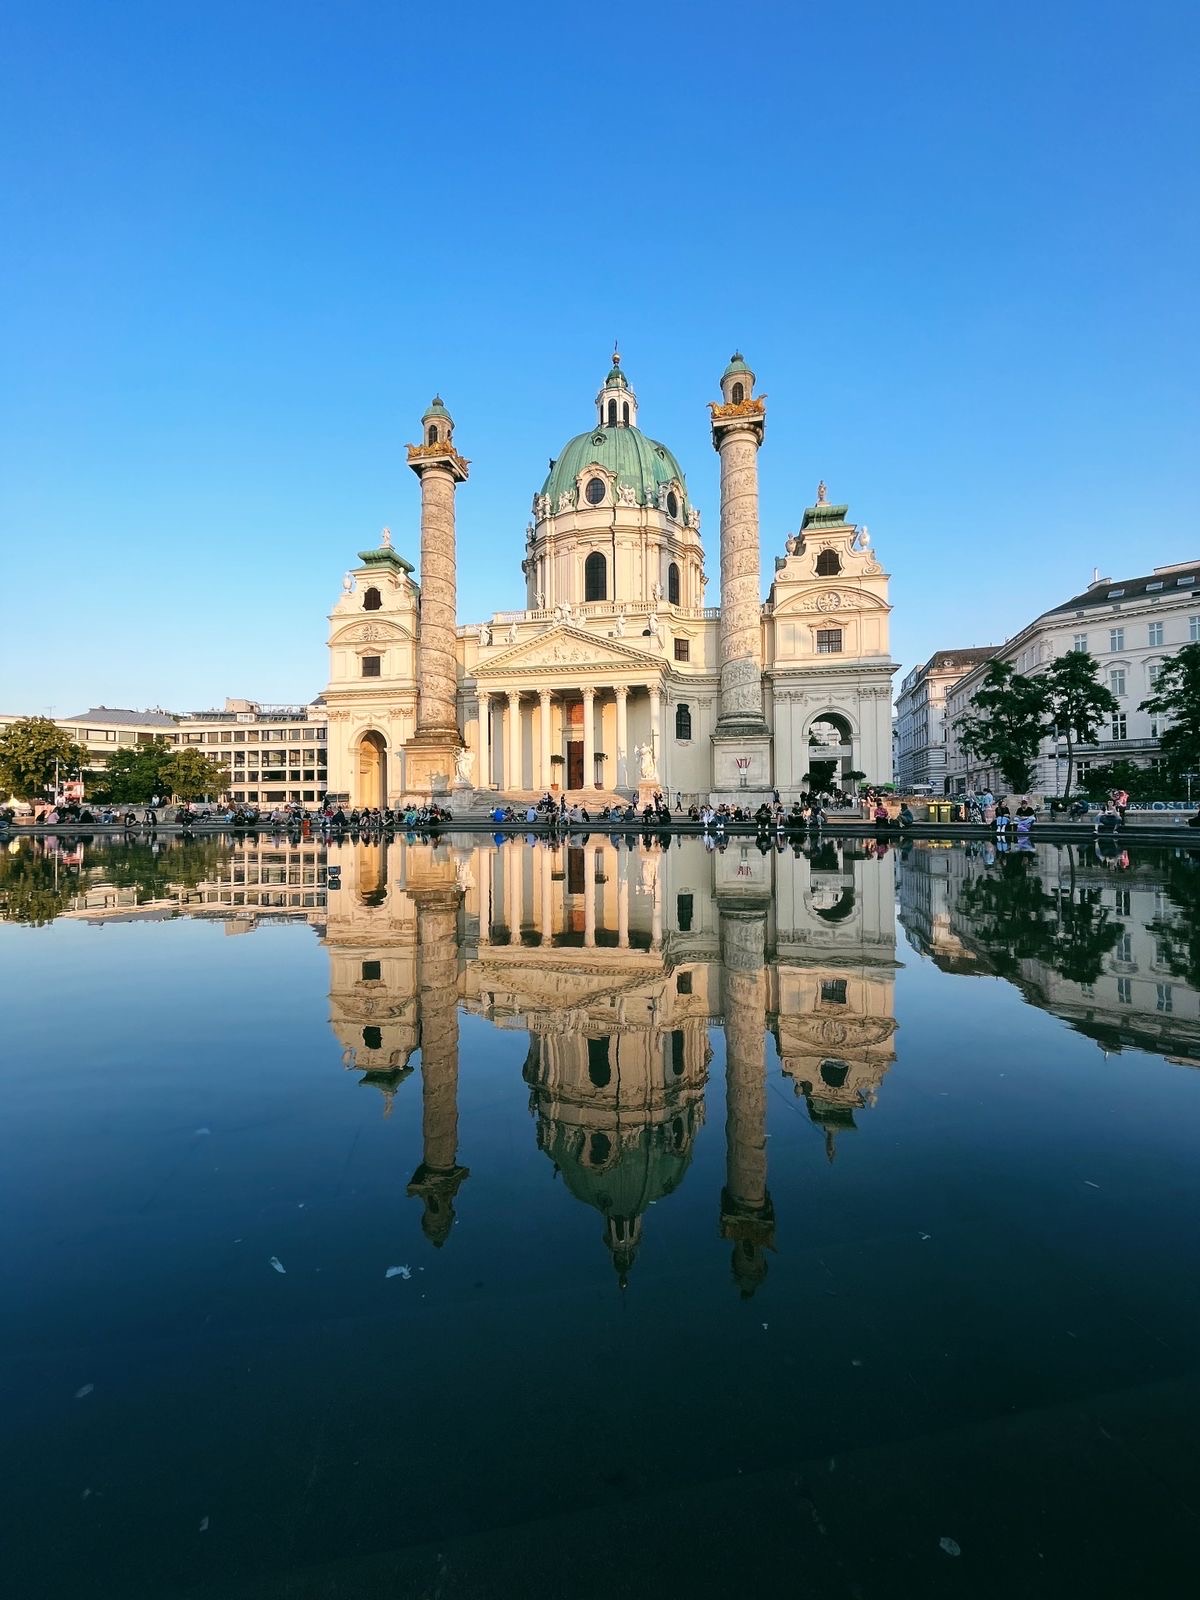 A grand baroque-style white cathedral with a large green dome and twin columns stands against a clear blue sky. The building is beautifully reflected in a calm, glassy pool of water in the foreground, with people gathered around its base.